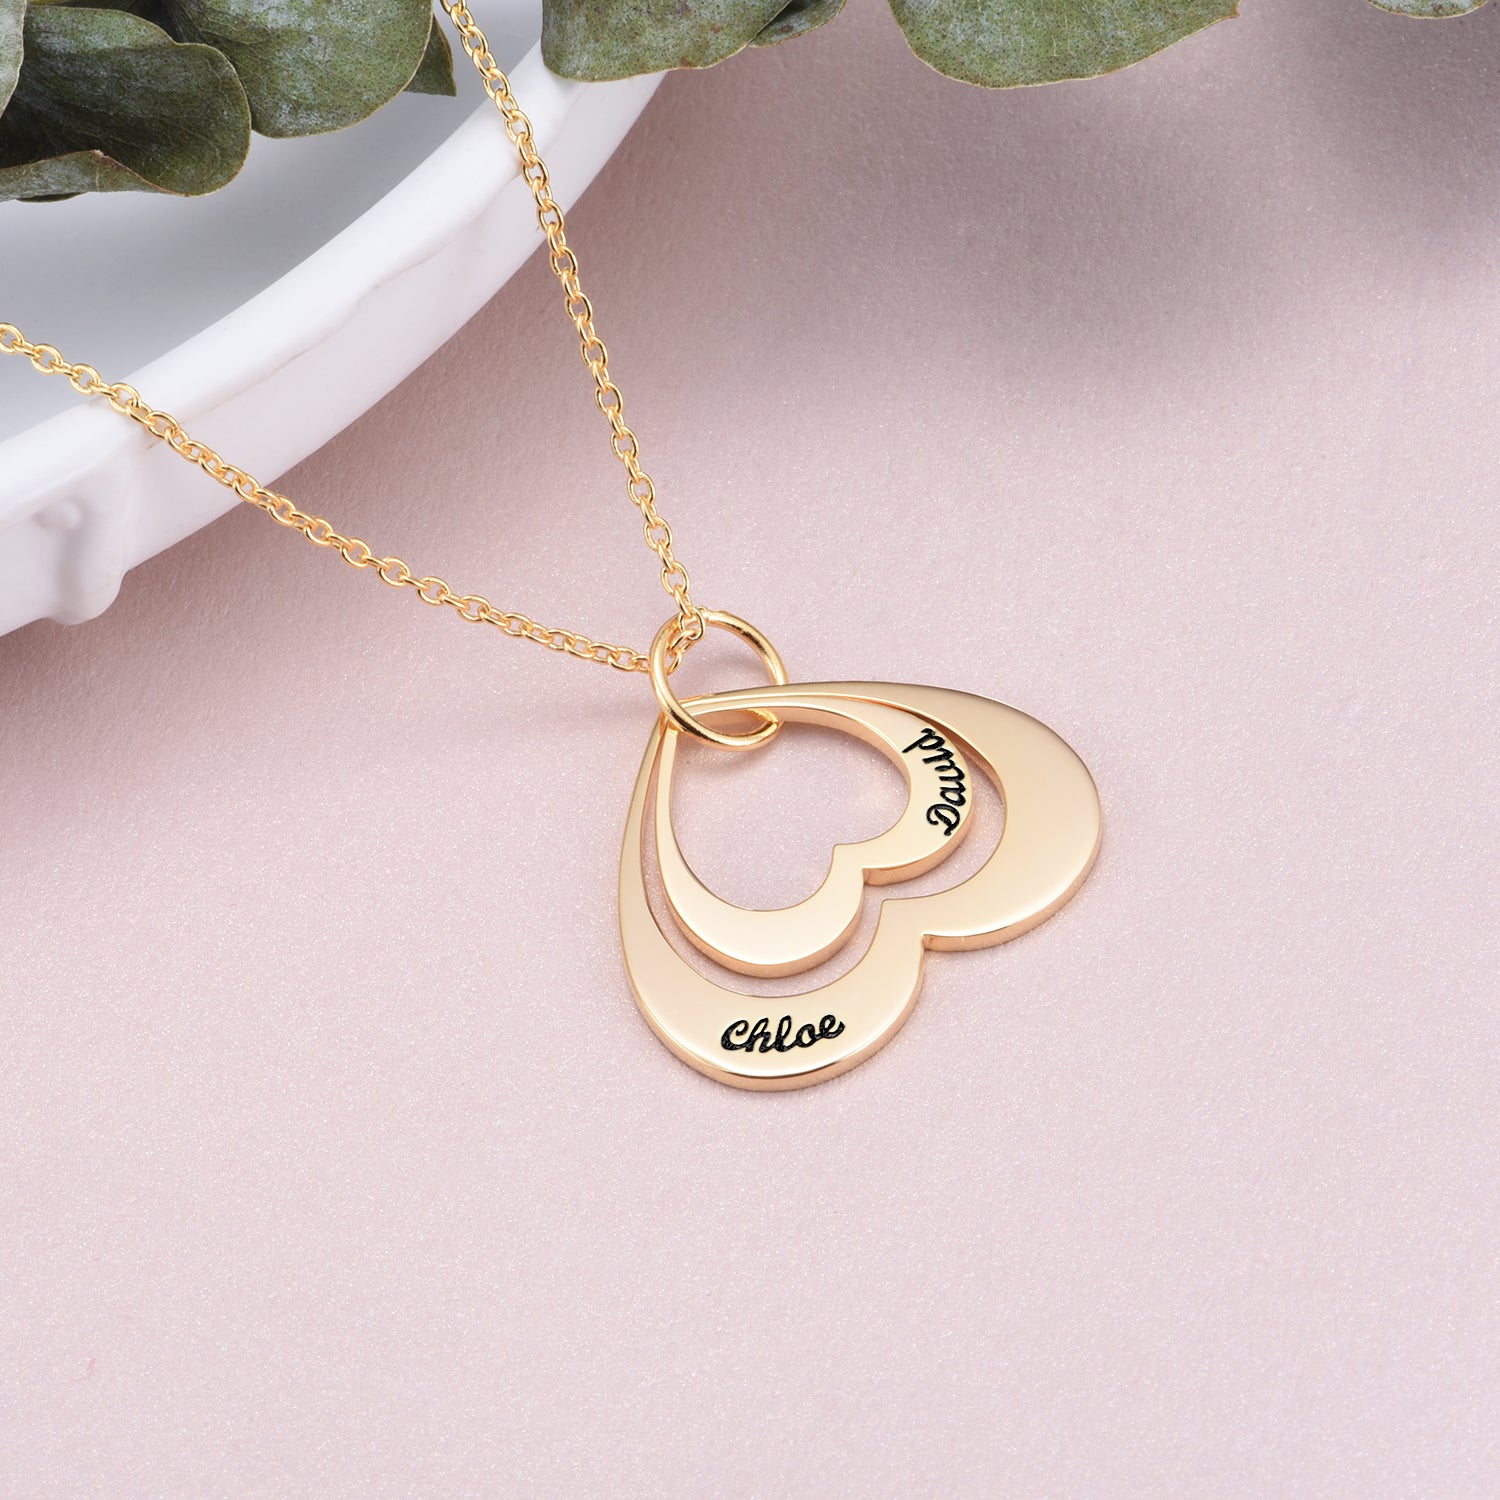 yafeini Custom Name Necklace Personalized Jewelry Copper 925 Sterling ...